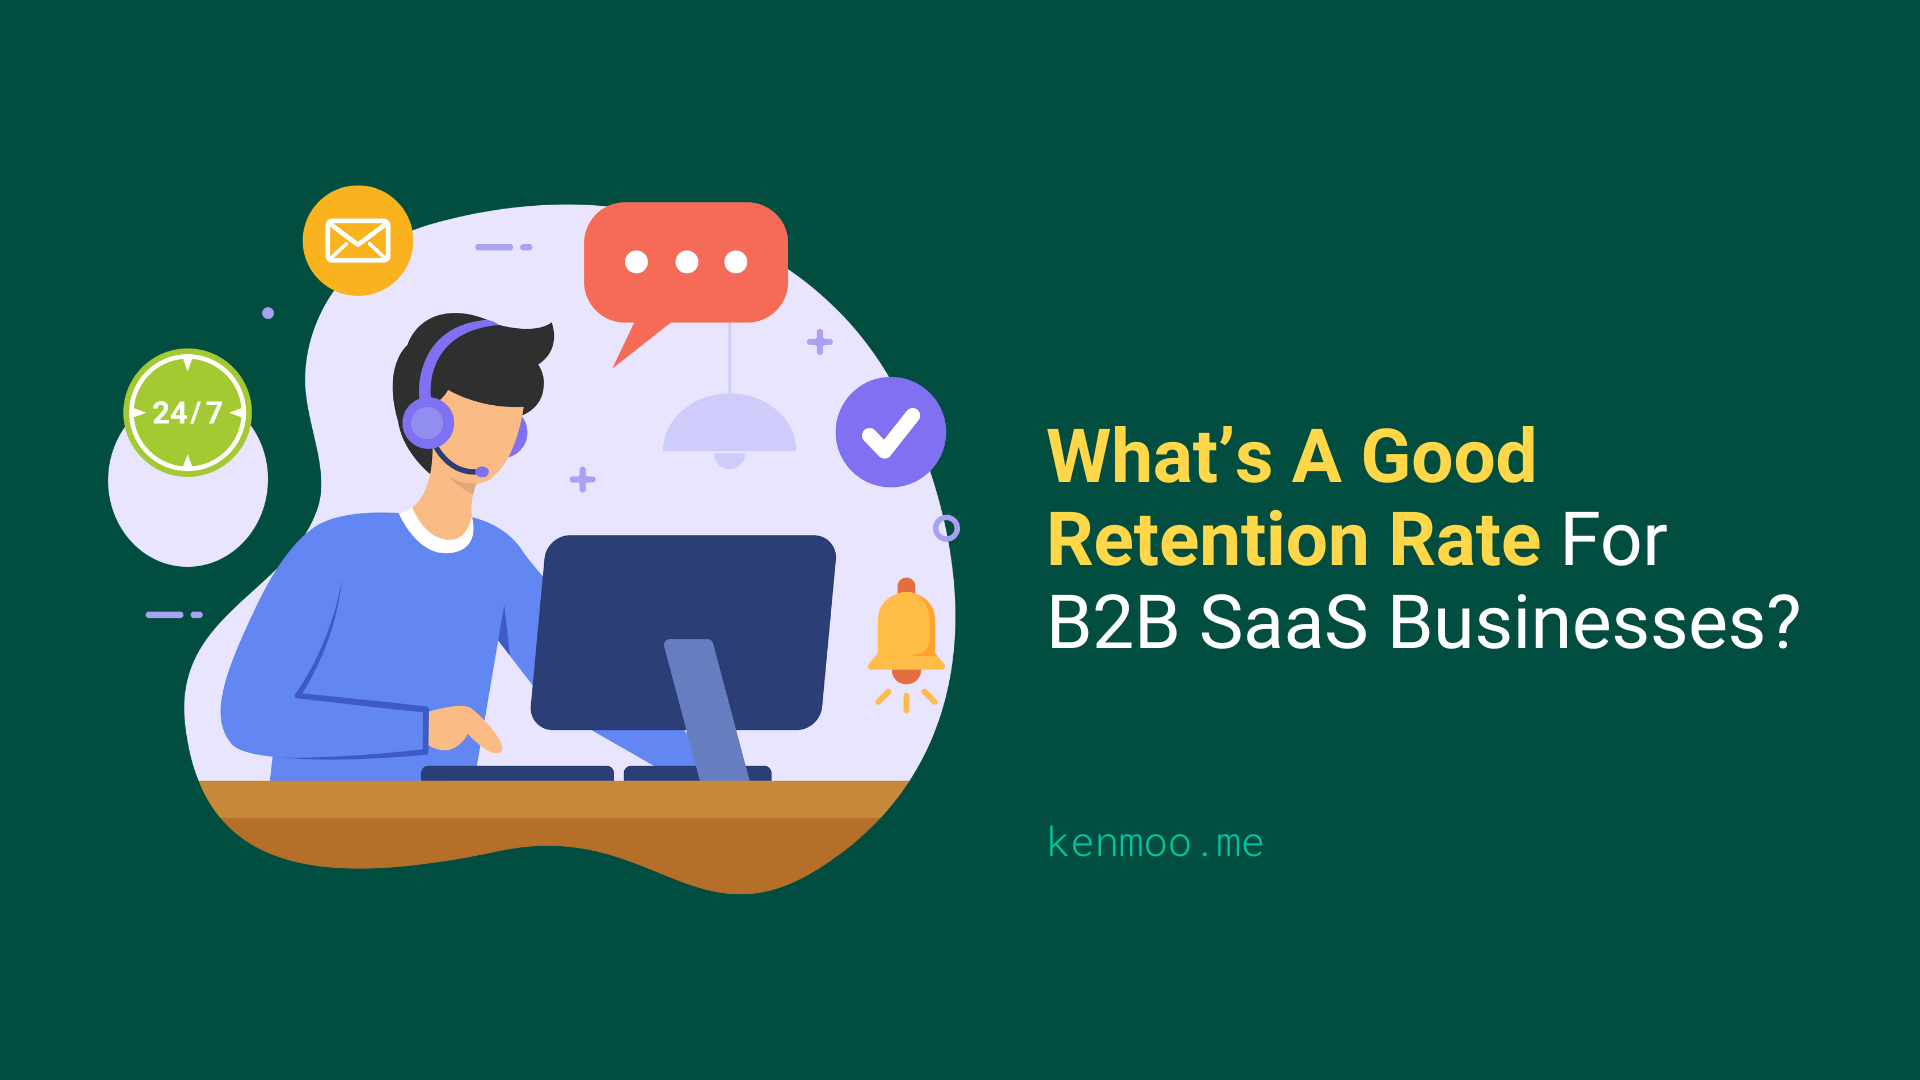 What’s A Good Retention Rate For B2B SaaS Businesses?